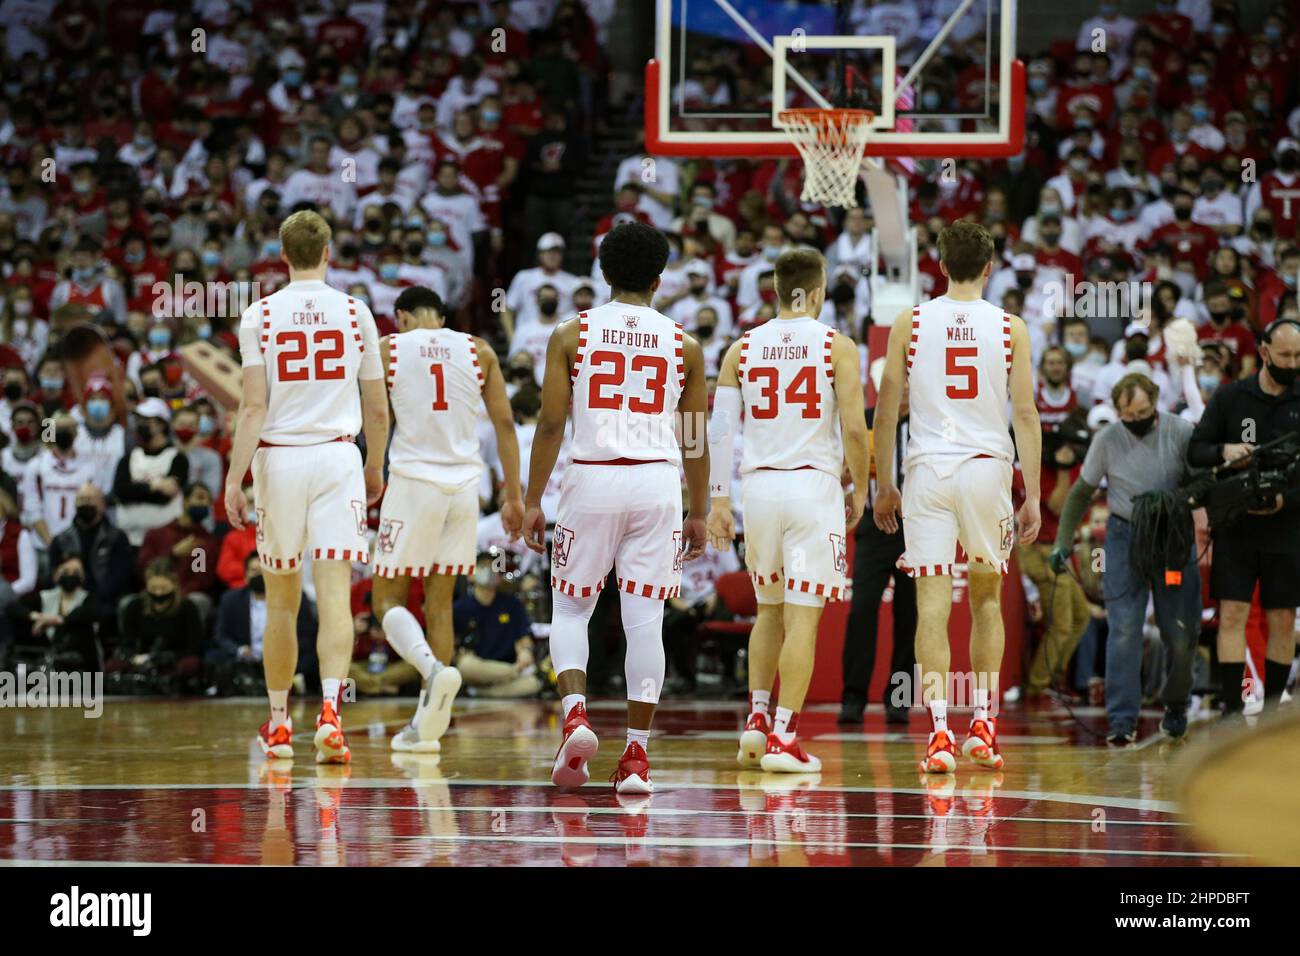 Madison, WI, USA. 20th Feb, 2022. Wisconsin Badgers forward Steven Crowl (22), guard Johnny Davis (1), guard Chucky Hepburn (23), guard Brad Davison (34), and forward Tyler Wahl (5) during the NCAA Basketball game between the Michigan Wolverines and the Wisconsin Badgers at the Kohl Center in Madison, WI. Darren Lee/CSM/Alamy Live News Stock Photo